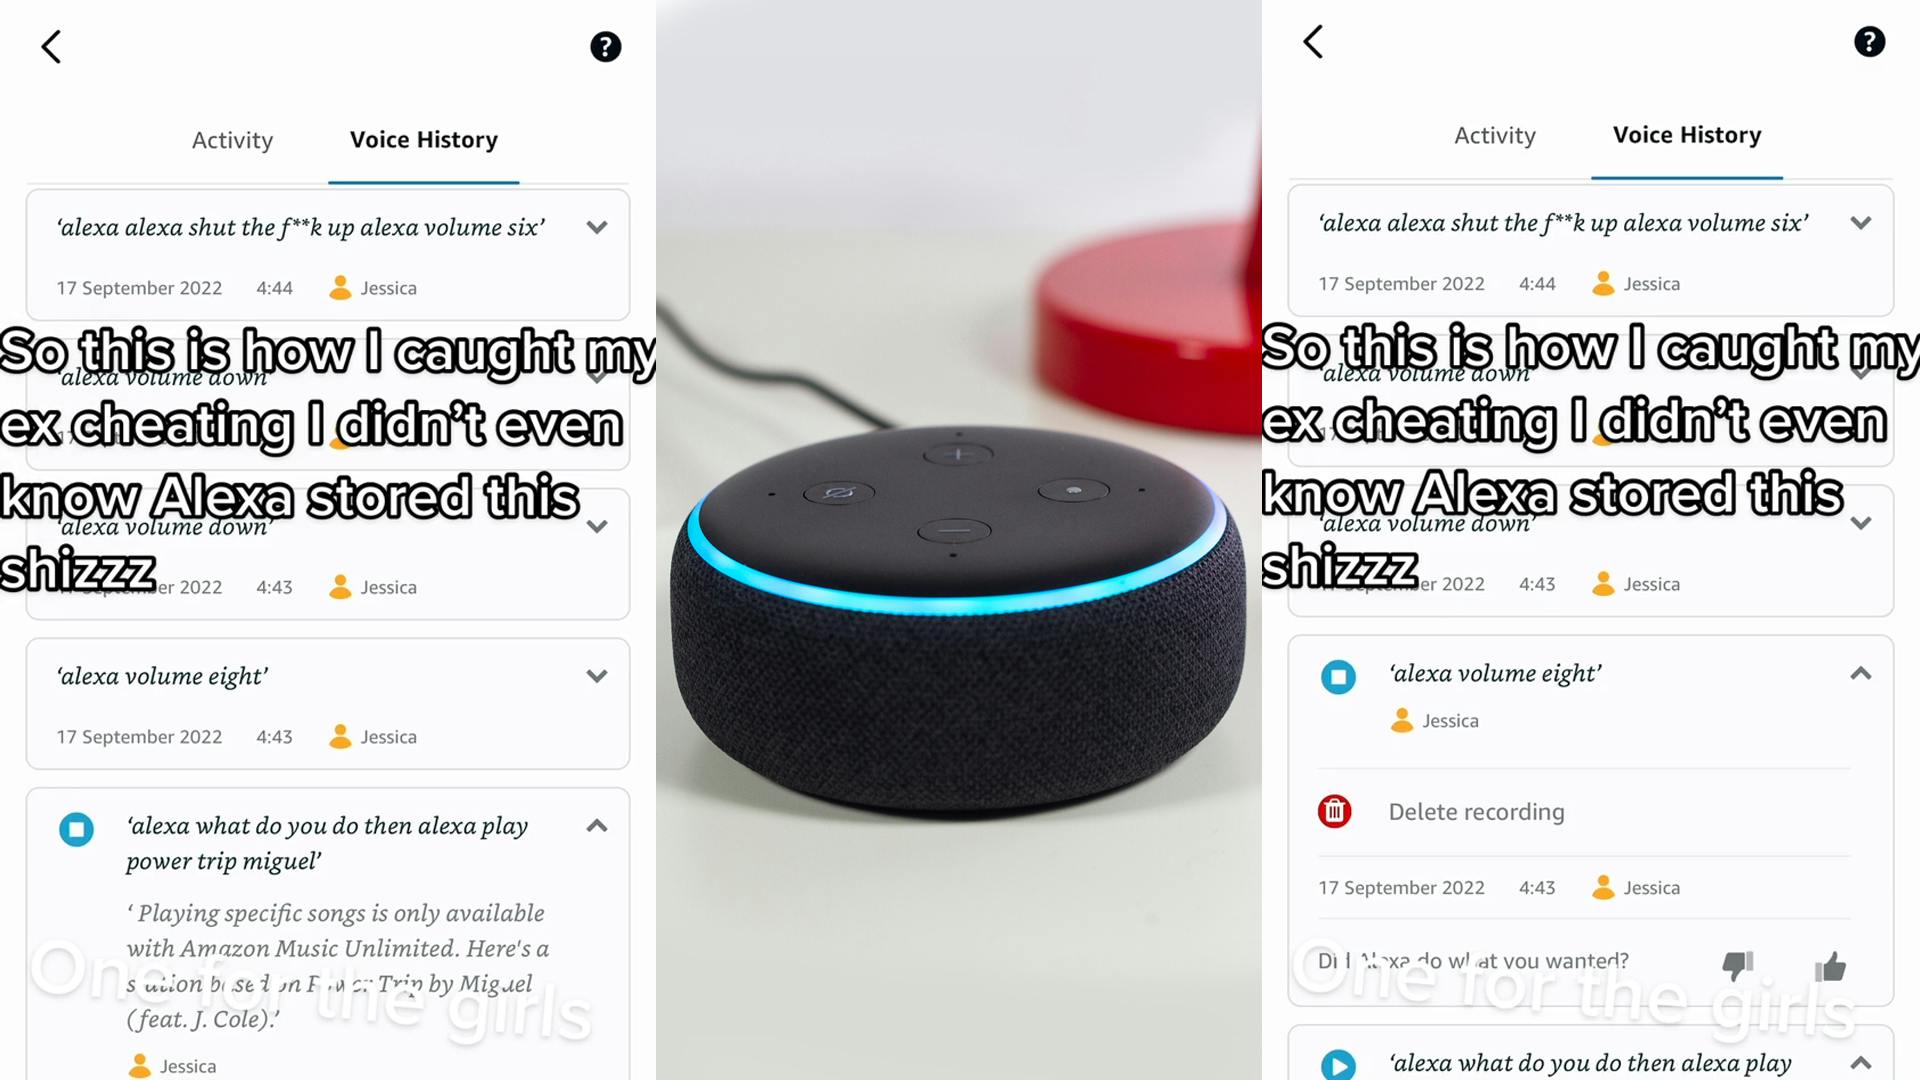 Alexa voice history 'alexa what do you do then alexa play power trip miguel' caption "So this is how I caught my ex cheating I didn't even know Alexa stored this shizzz" (l) Alexa on white surface (c) A;exa voice history 'alexa volume eight' caption "So this is how I caught my ex cheating I didn't even know Alexa stored this shizzz" (r)